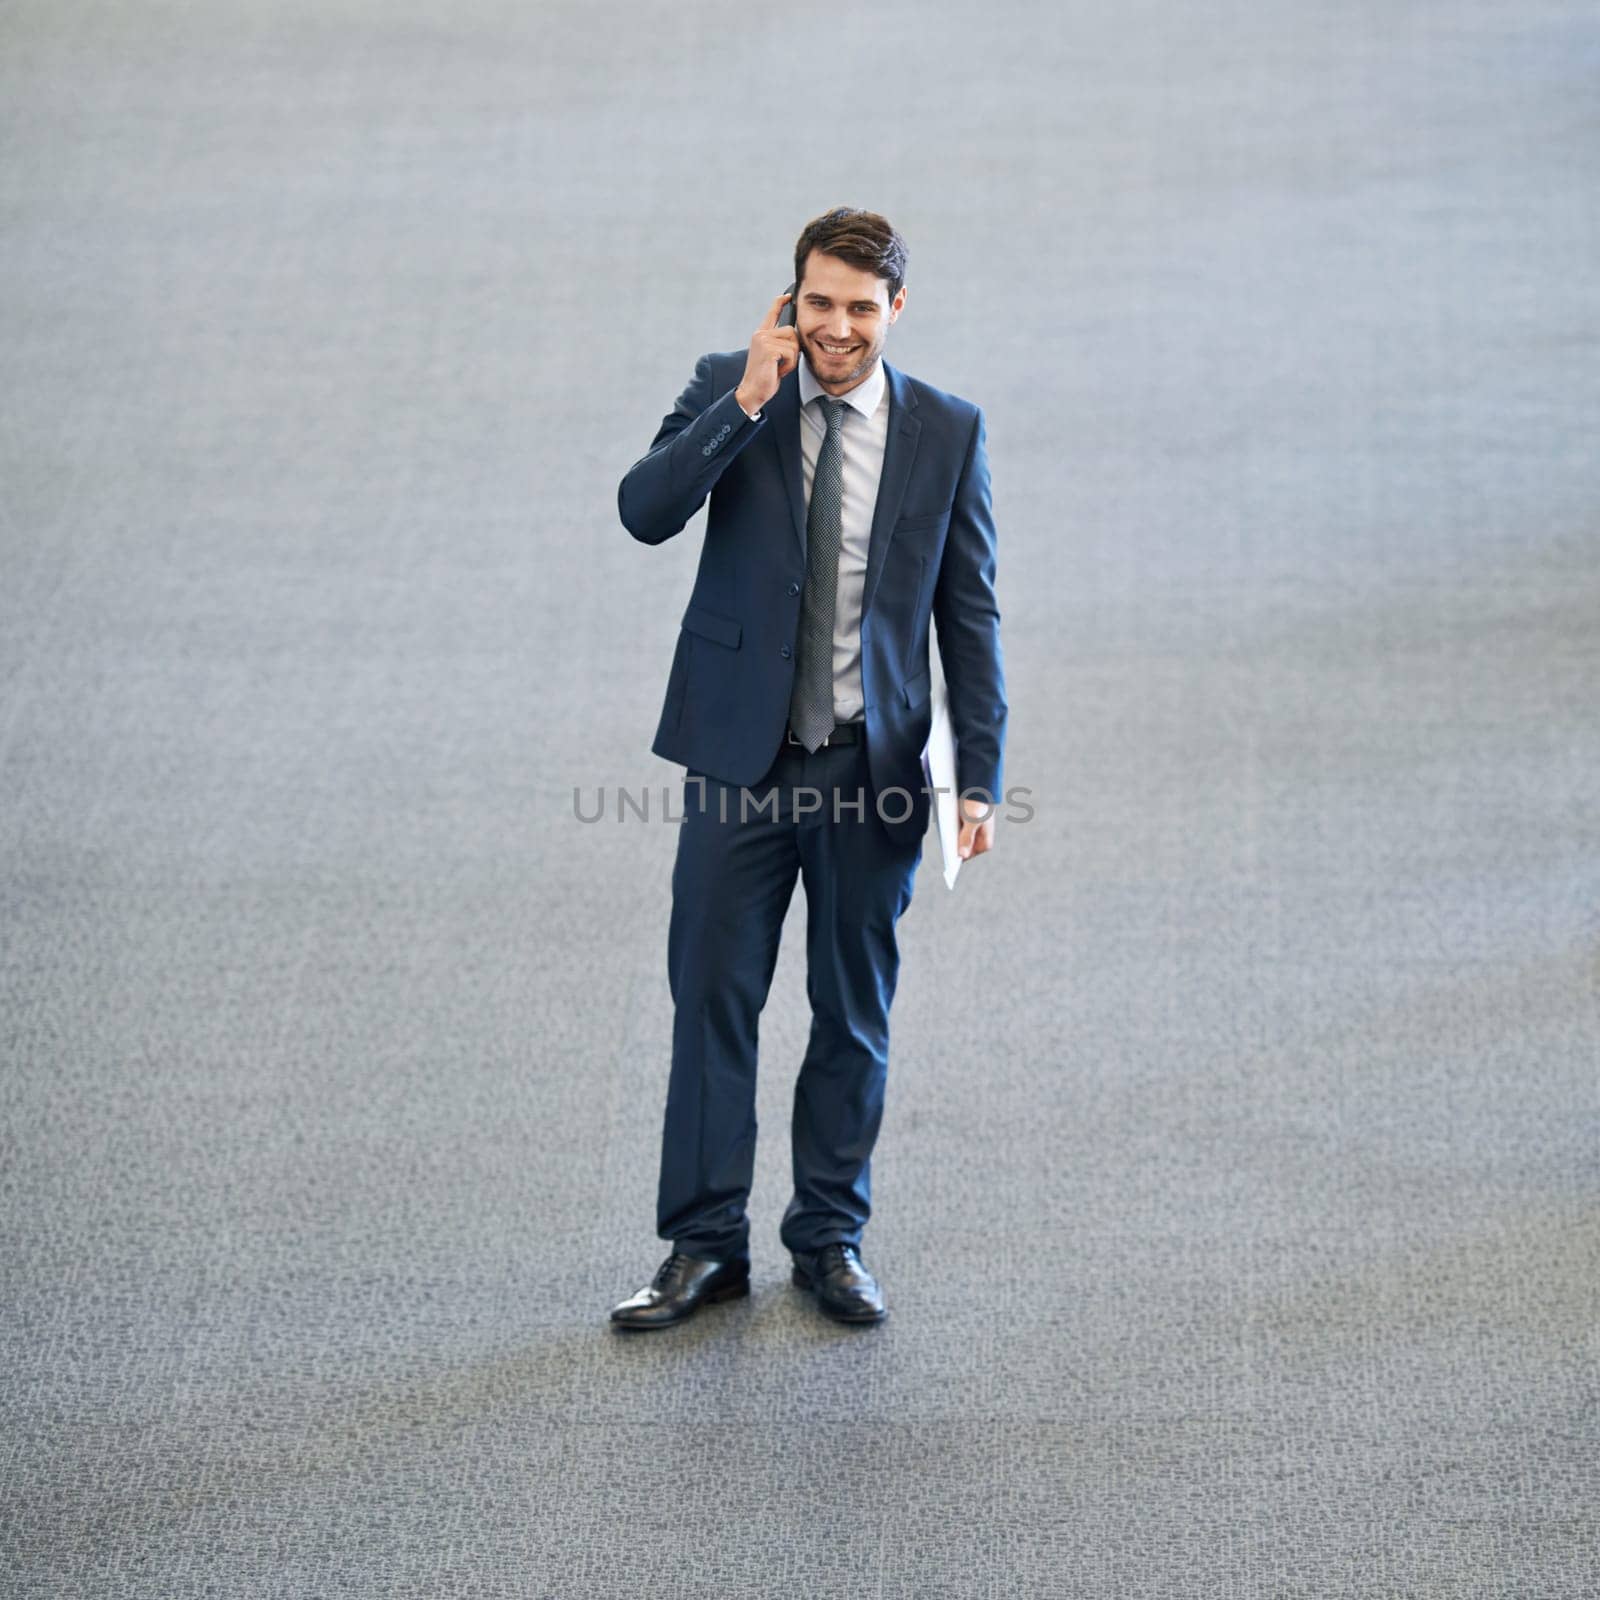 Mockup, talking or happy businessman on a phone call in office networking or speaking to chat in discussion. Space, planning or male entrepreneur in conversation, mobile communication or deal offer.